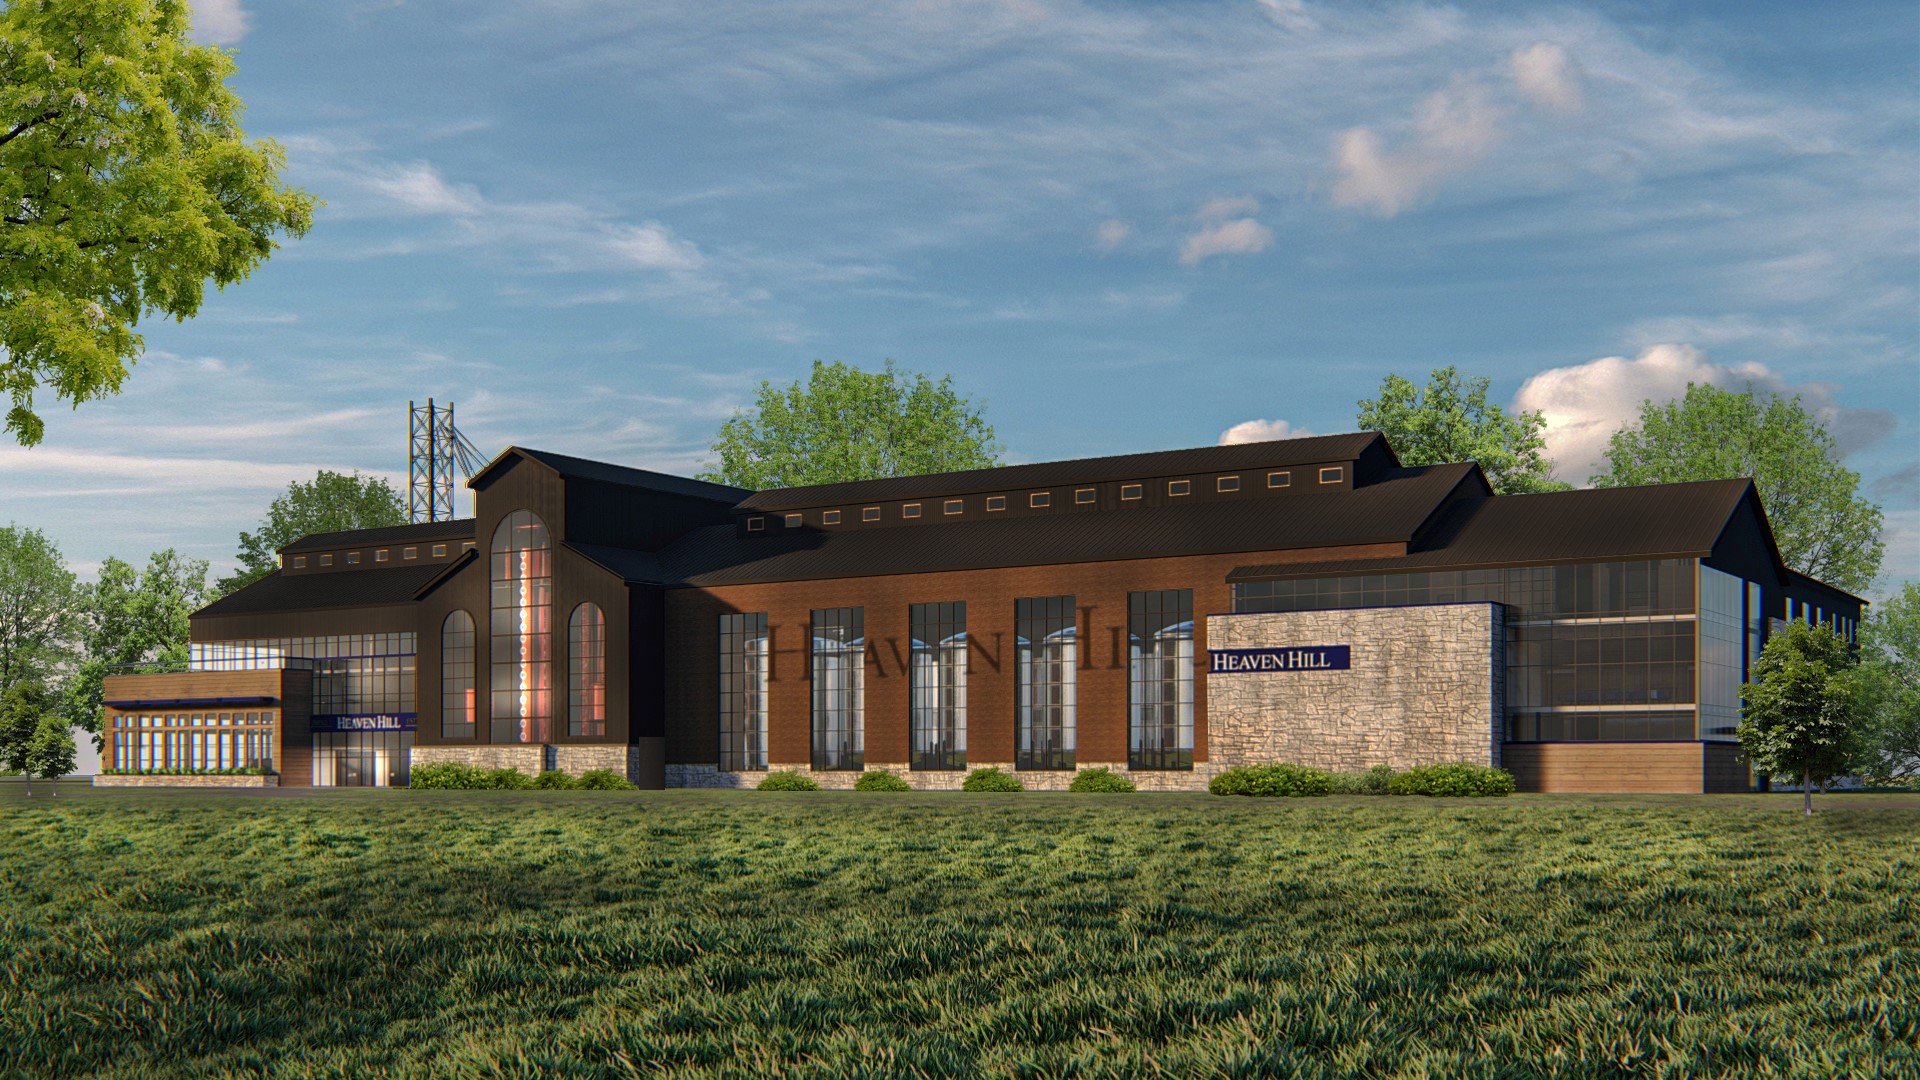 An architect's rendering of the planned Heaven Hill Distillery to be built in Bardstown, Kentucky. Image courtesy Heaven Hill.